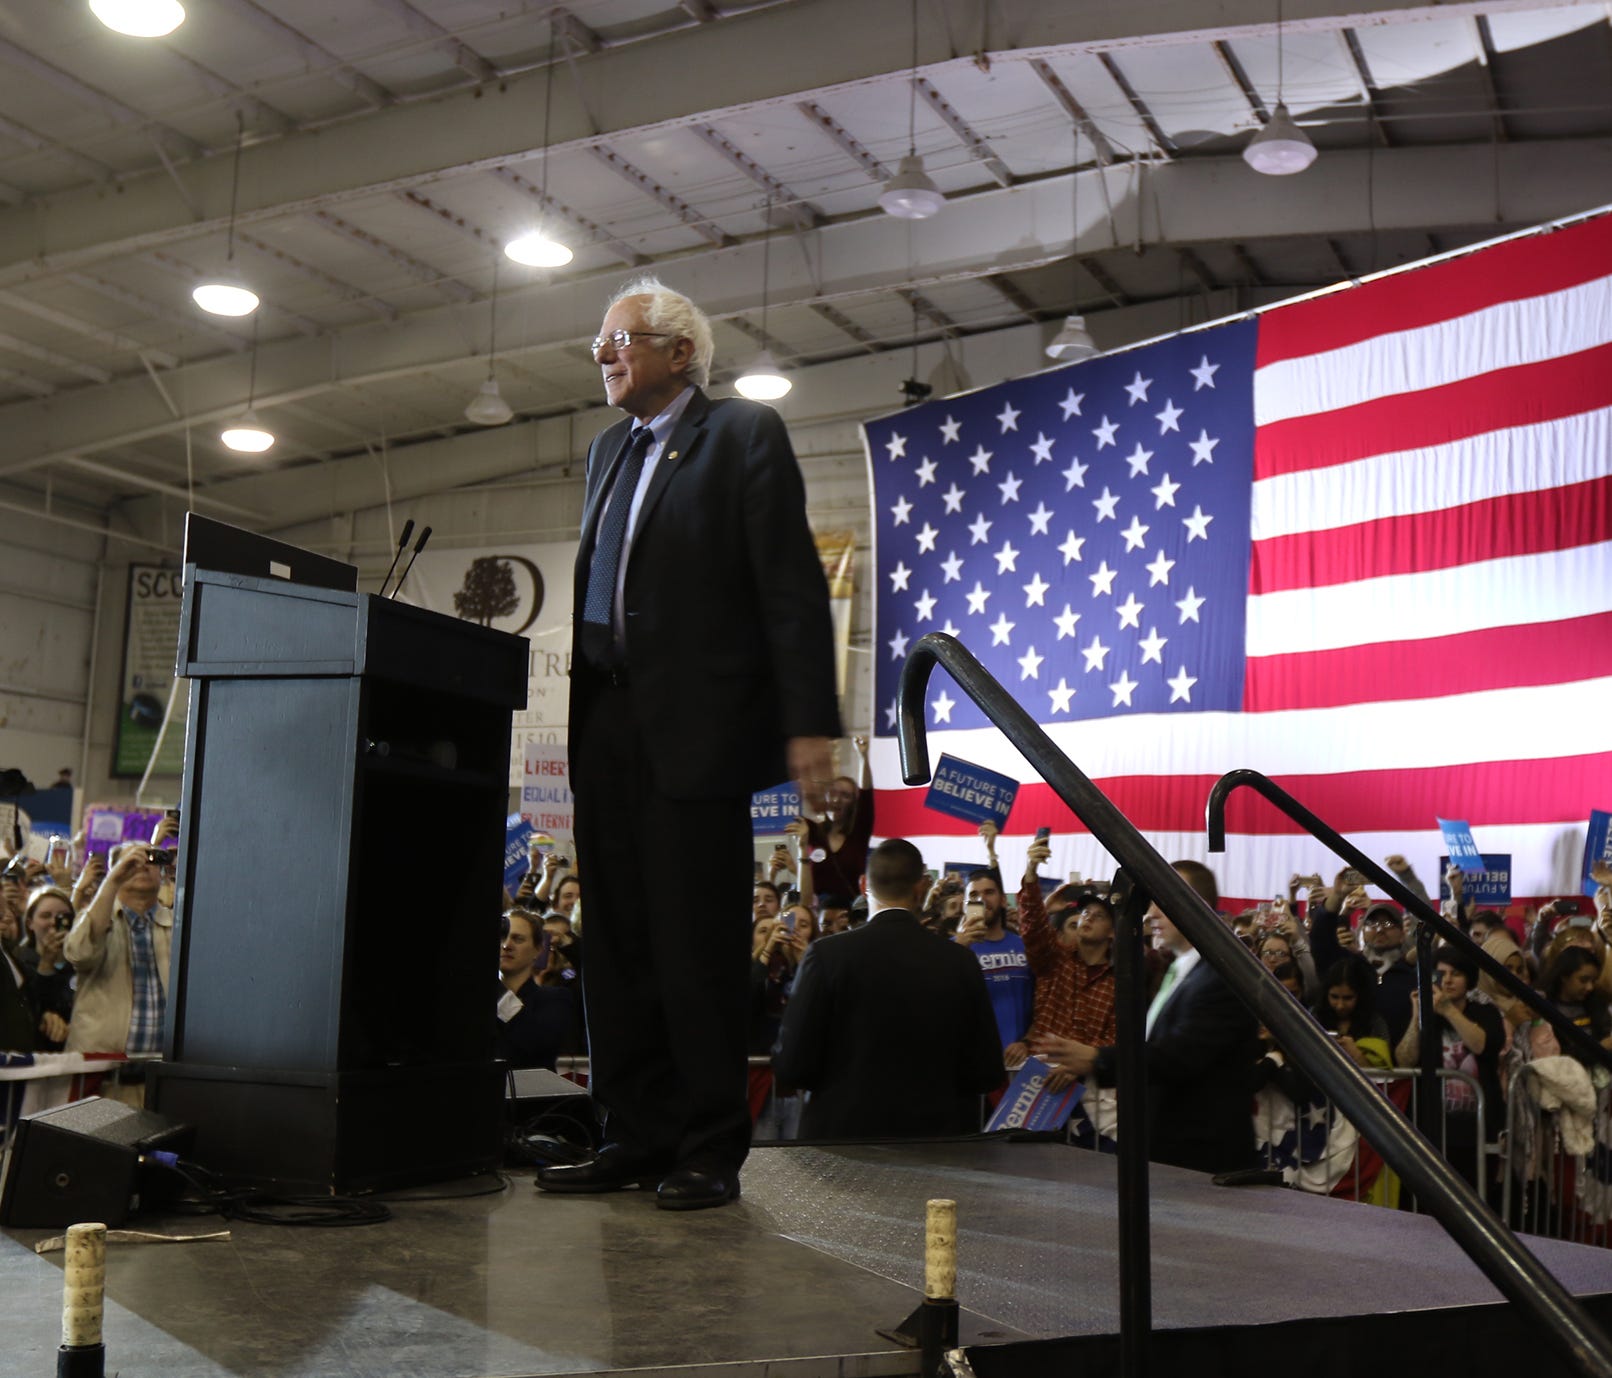 Bernie Sanders takes in the crowd at a presidential campaign event in New York last year. Sanders criticized Democratic senators who voted against legislation to allow drugs to be imported from Canada and other countries.